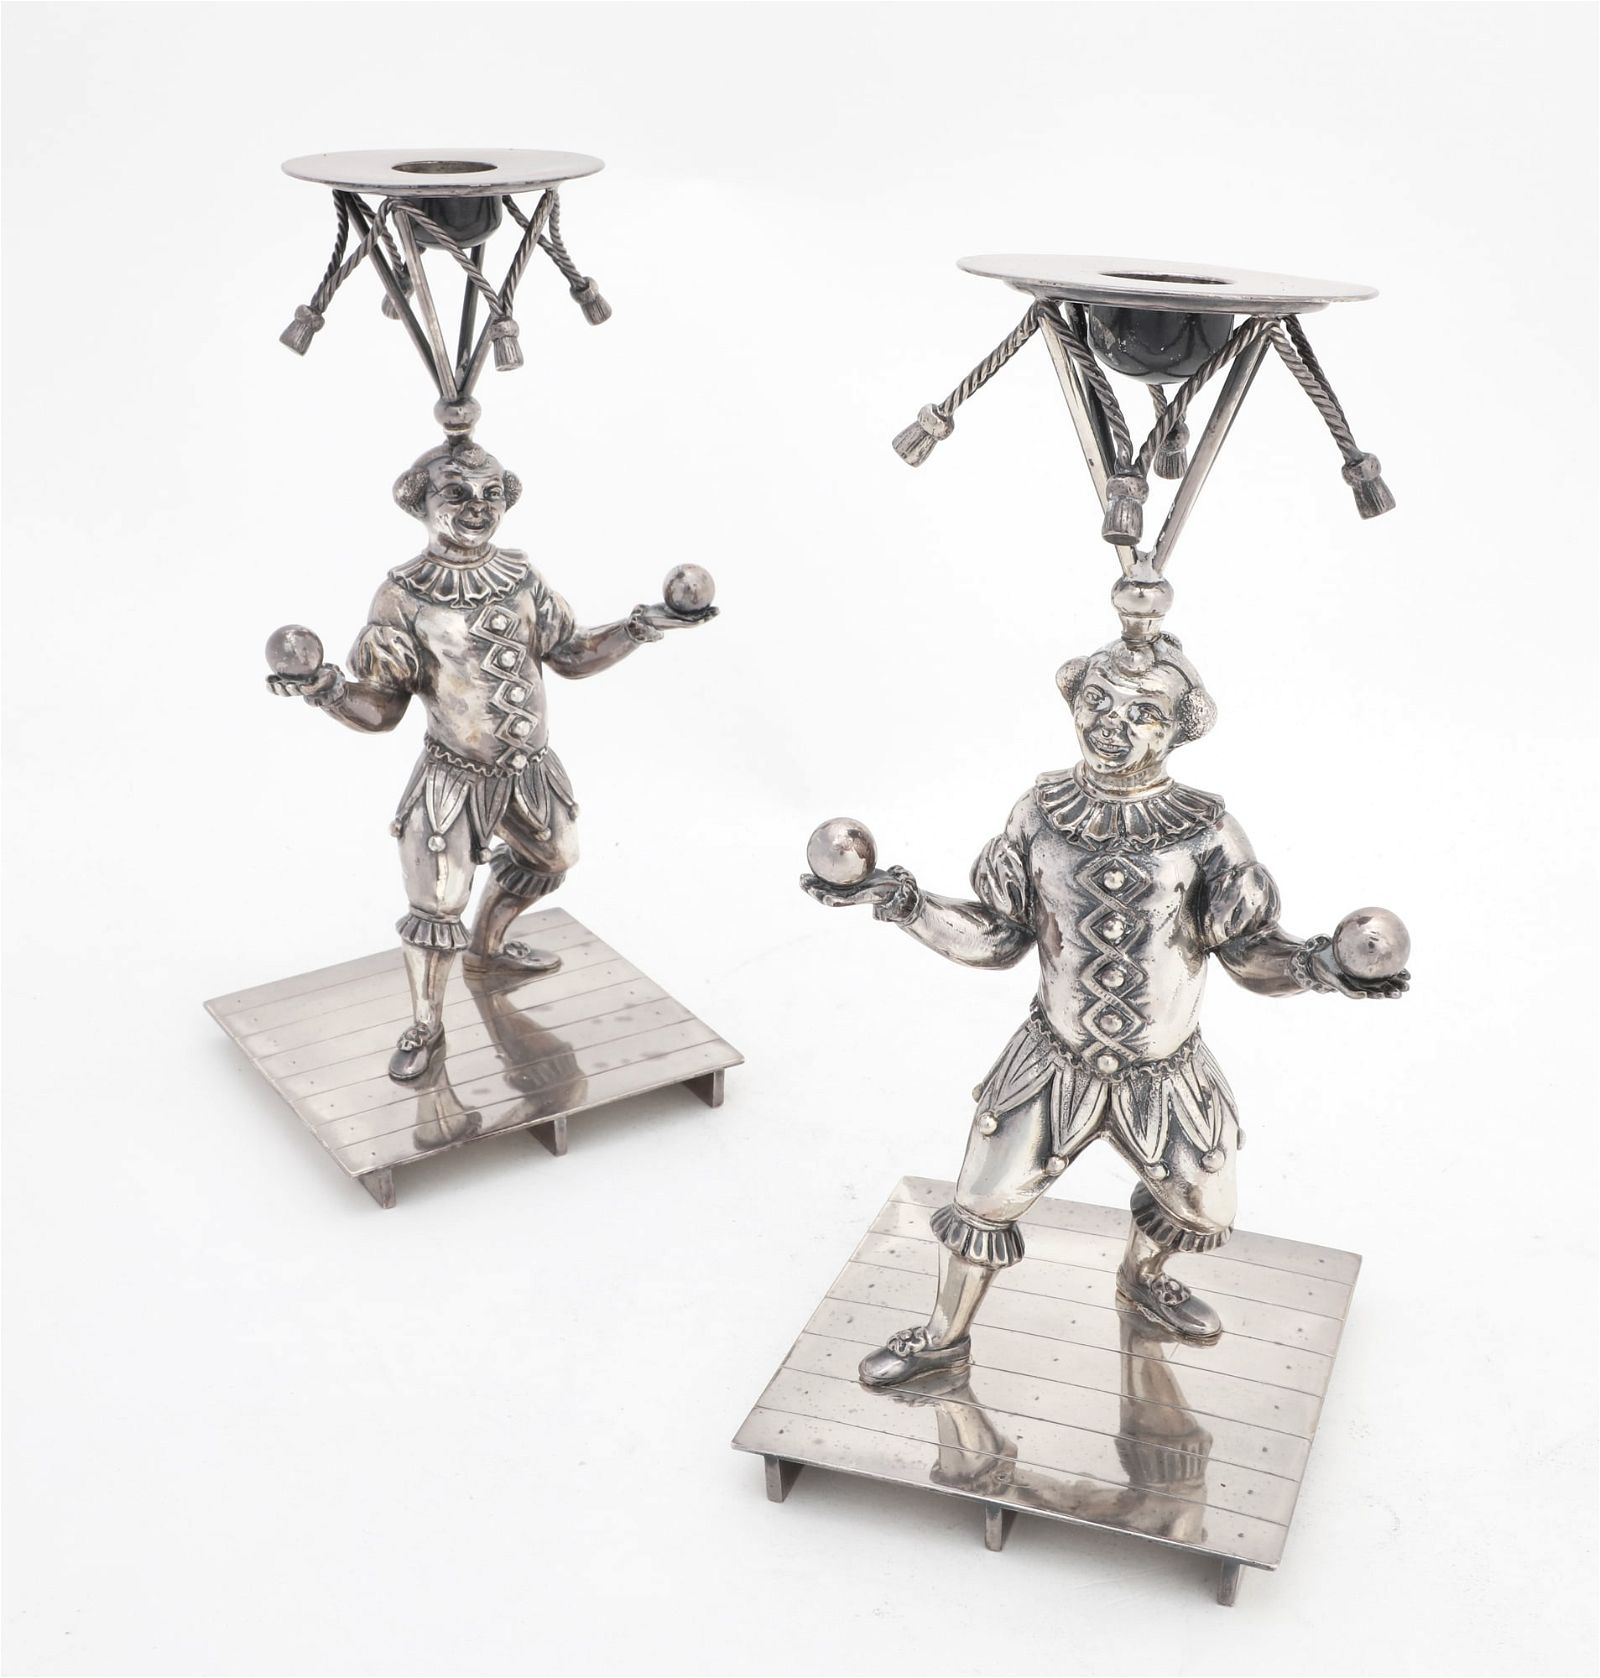 PAIR OF ENGLISH SILVERPLATE FIGURAL 2fb334f